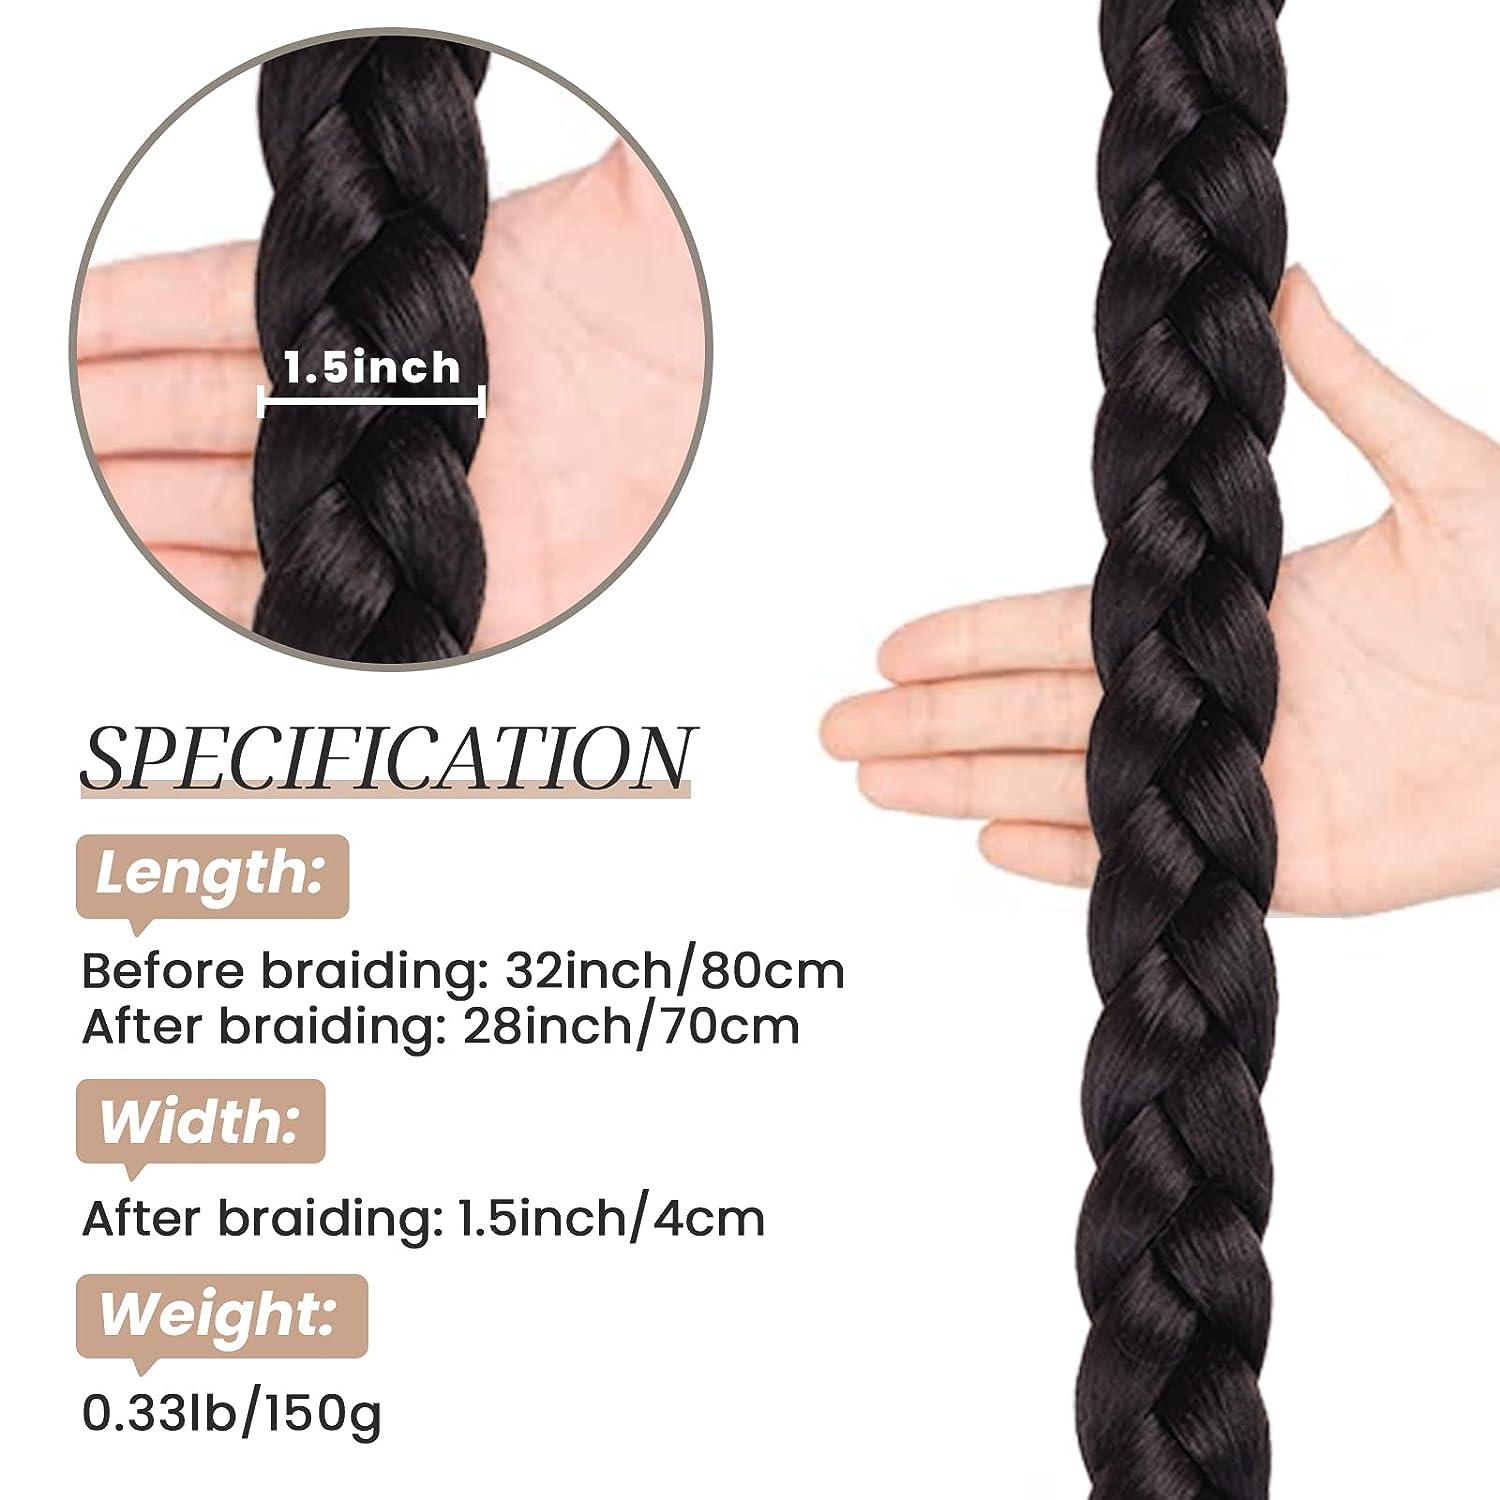 32inch Long Braided Ponytail Extension With Hair Tie Black Straight Wrap  Around Hair Braid Extensions For Women Synthetic High Temperature Fluffy  Natu